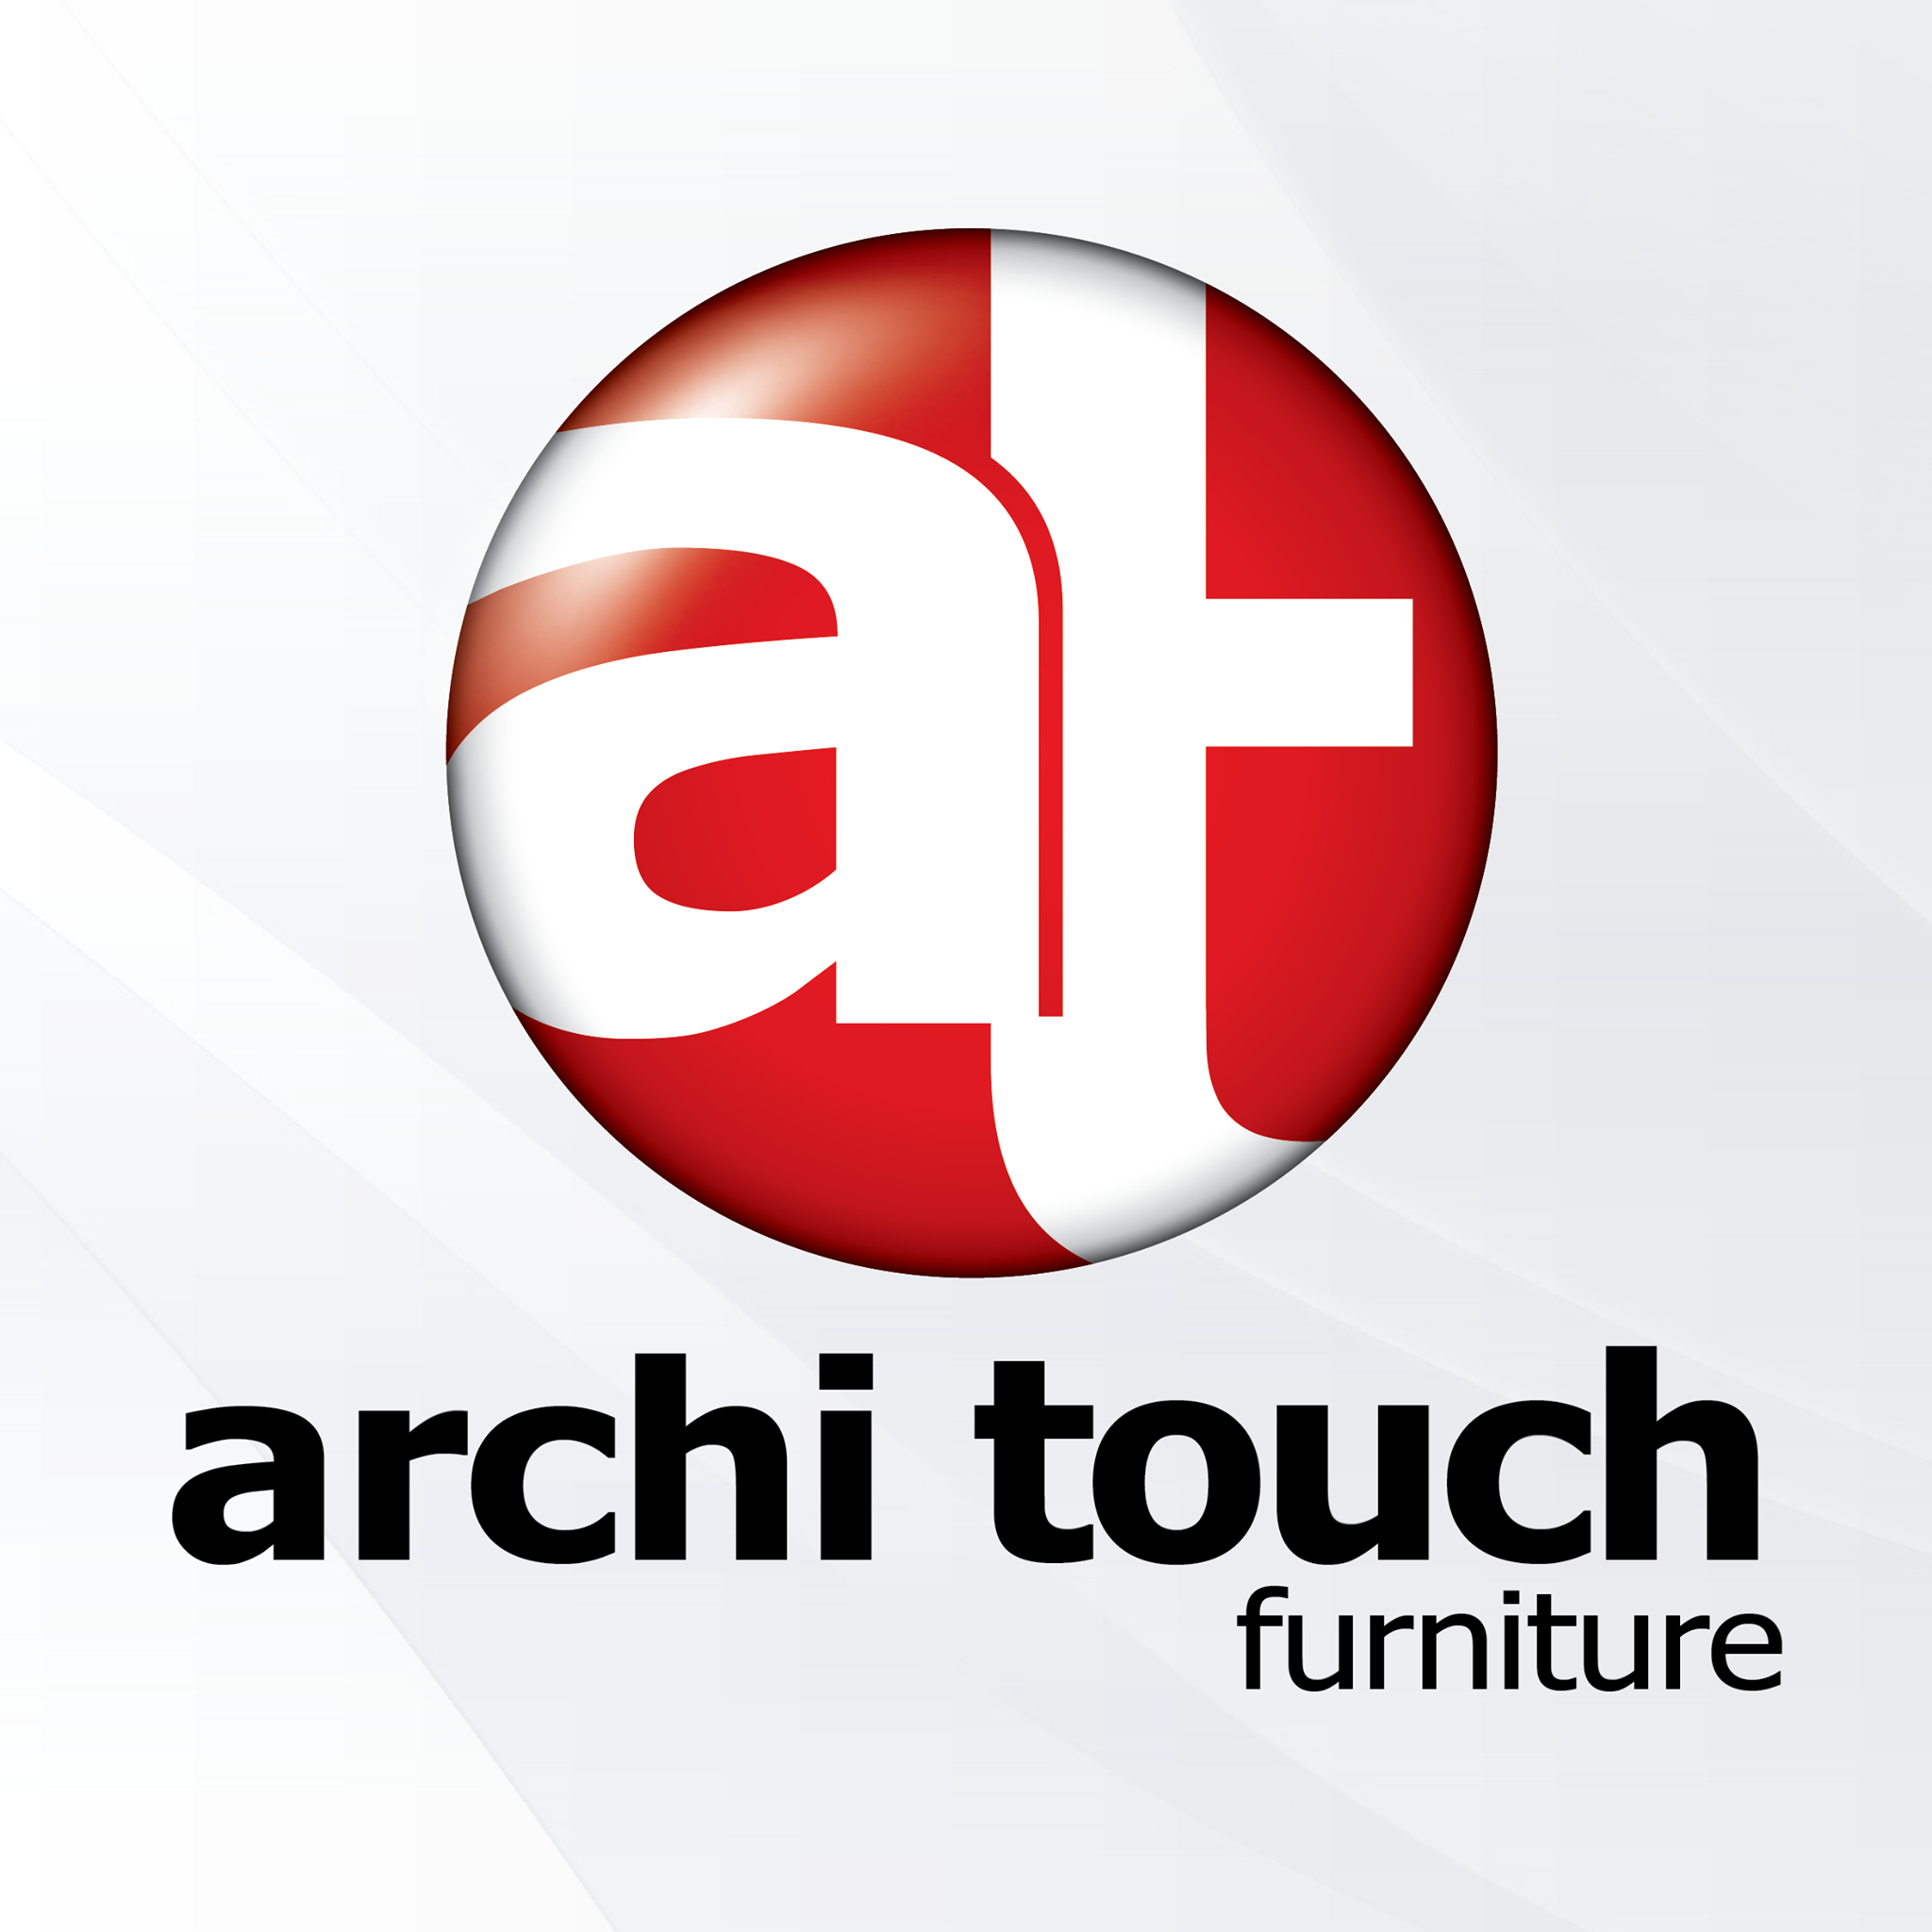 Archi touch furniture company